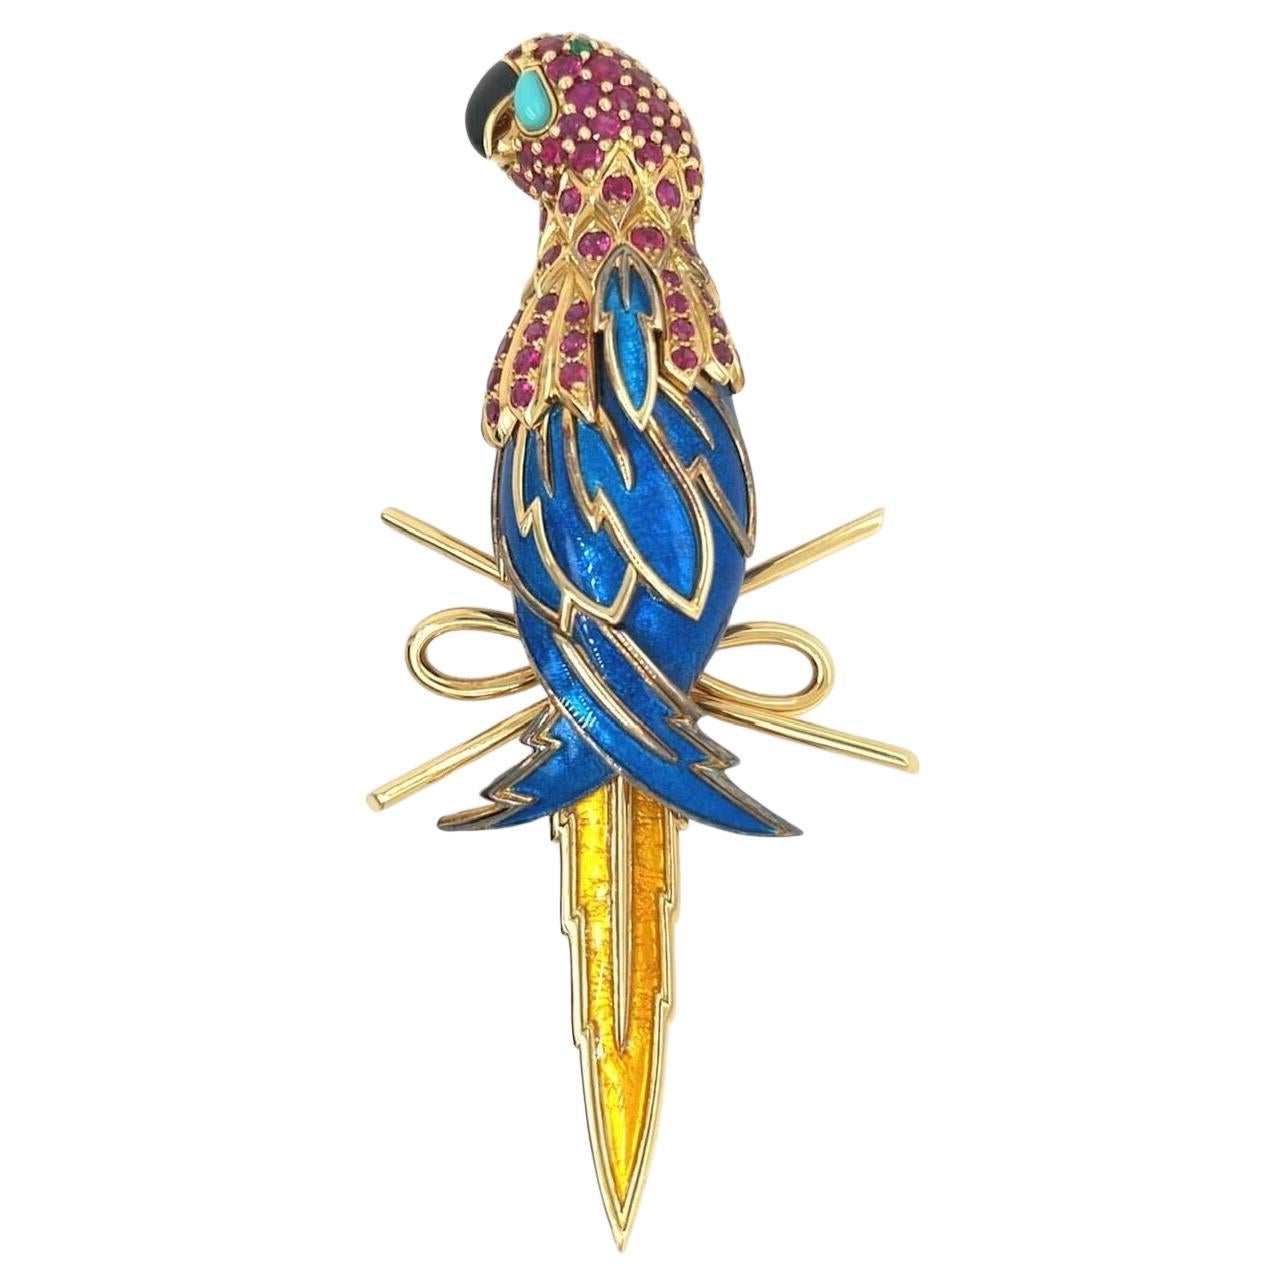 JEAN SCHLUMBERGER, TIFFANY & CO., Yellow Gold, Ruby, Turquoise and Enamel Brooch For Sale